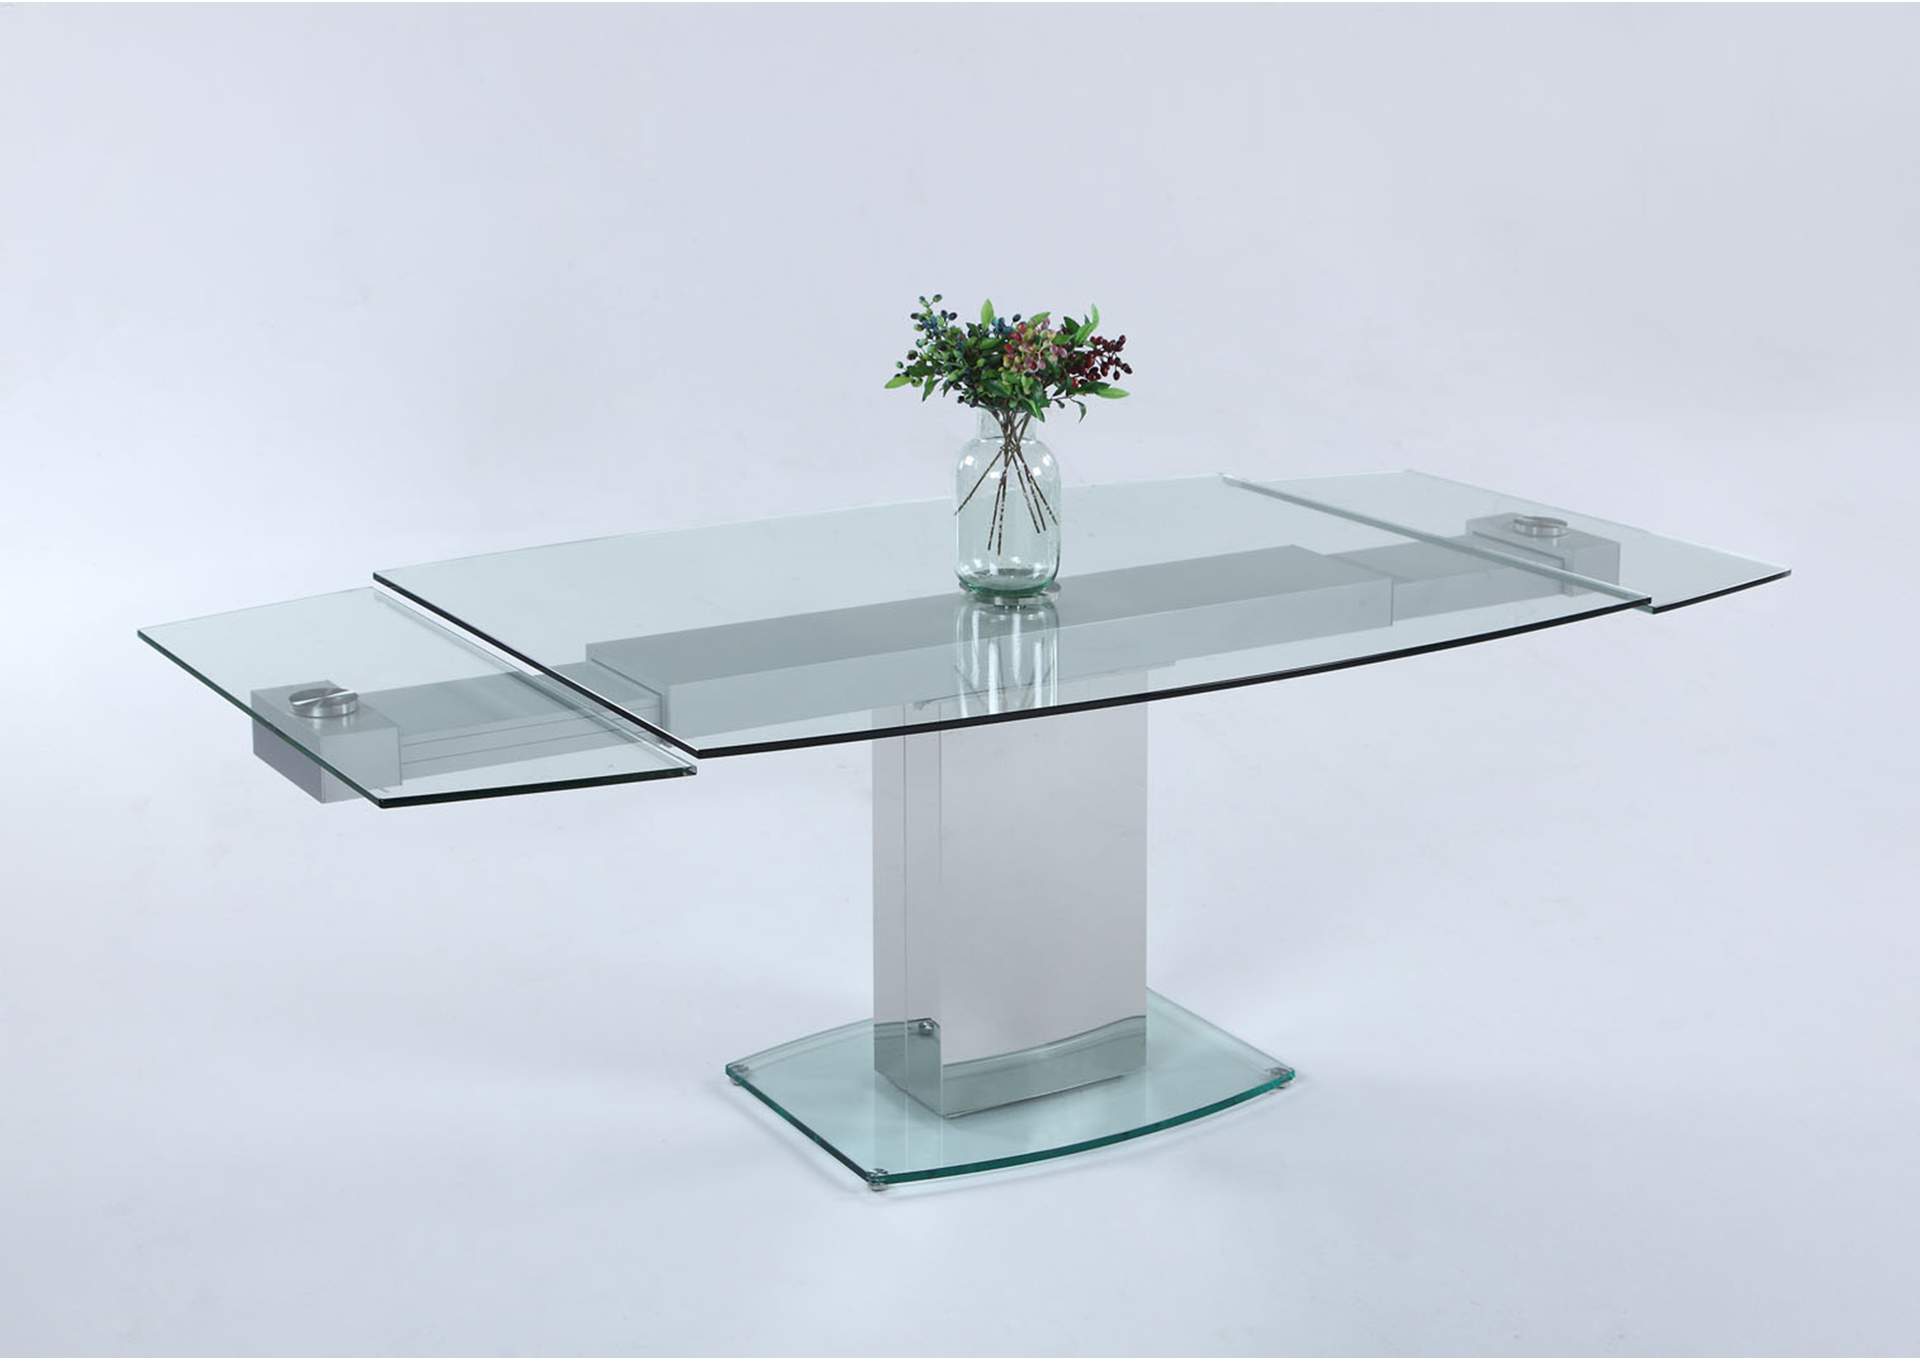 Mackenzie Clear Glass Top Dining Table,Chintaly Imports